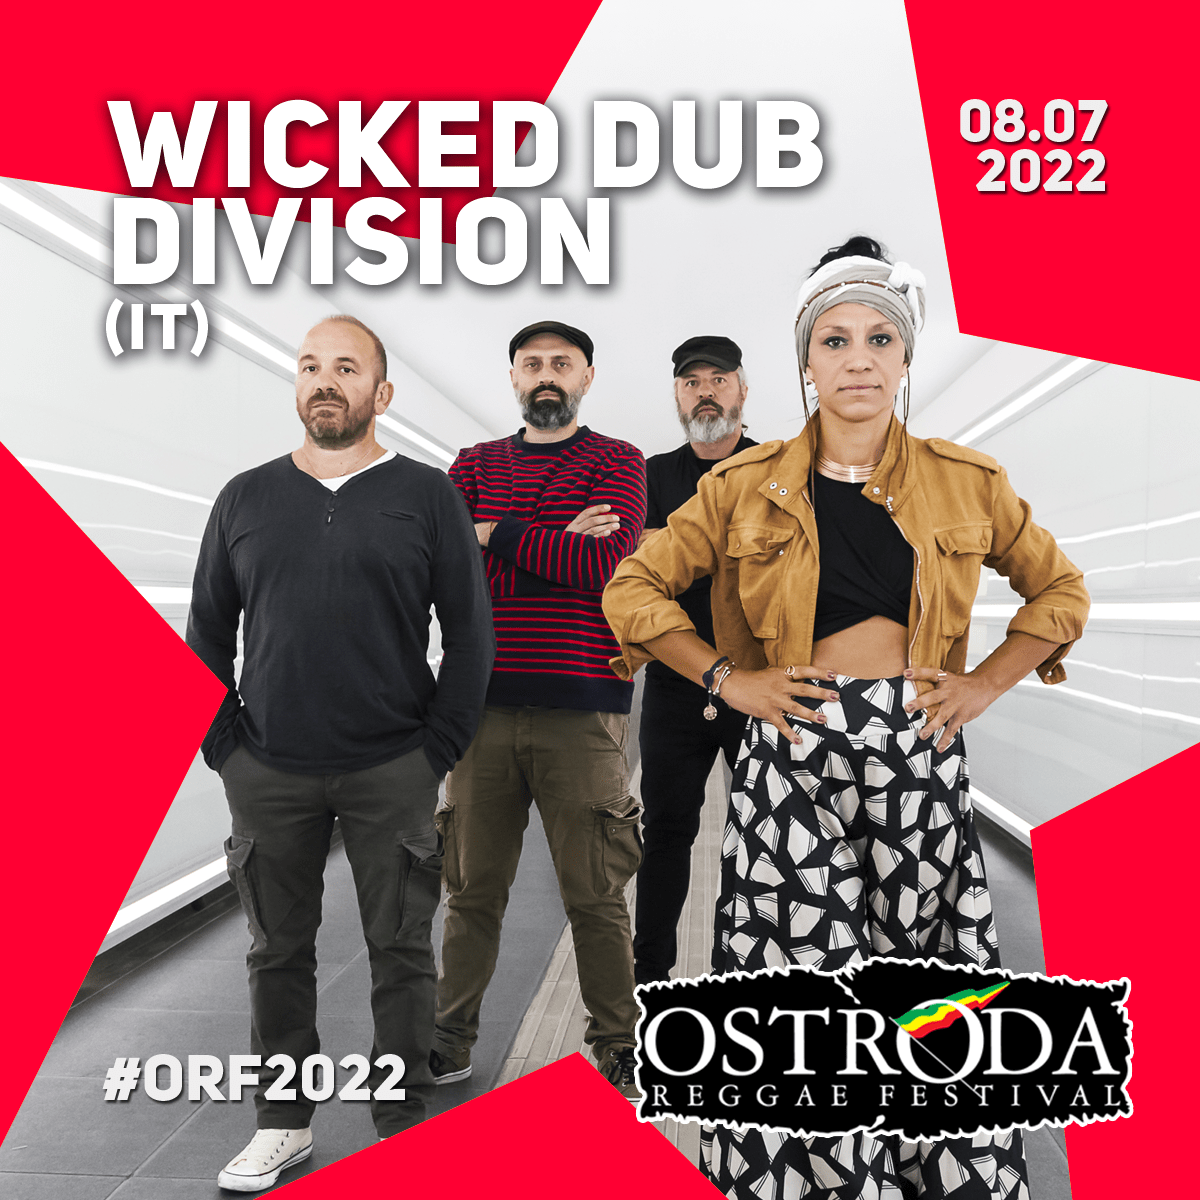 WICKED DUB DIVISION (Italy)